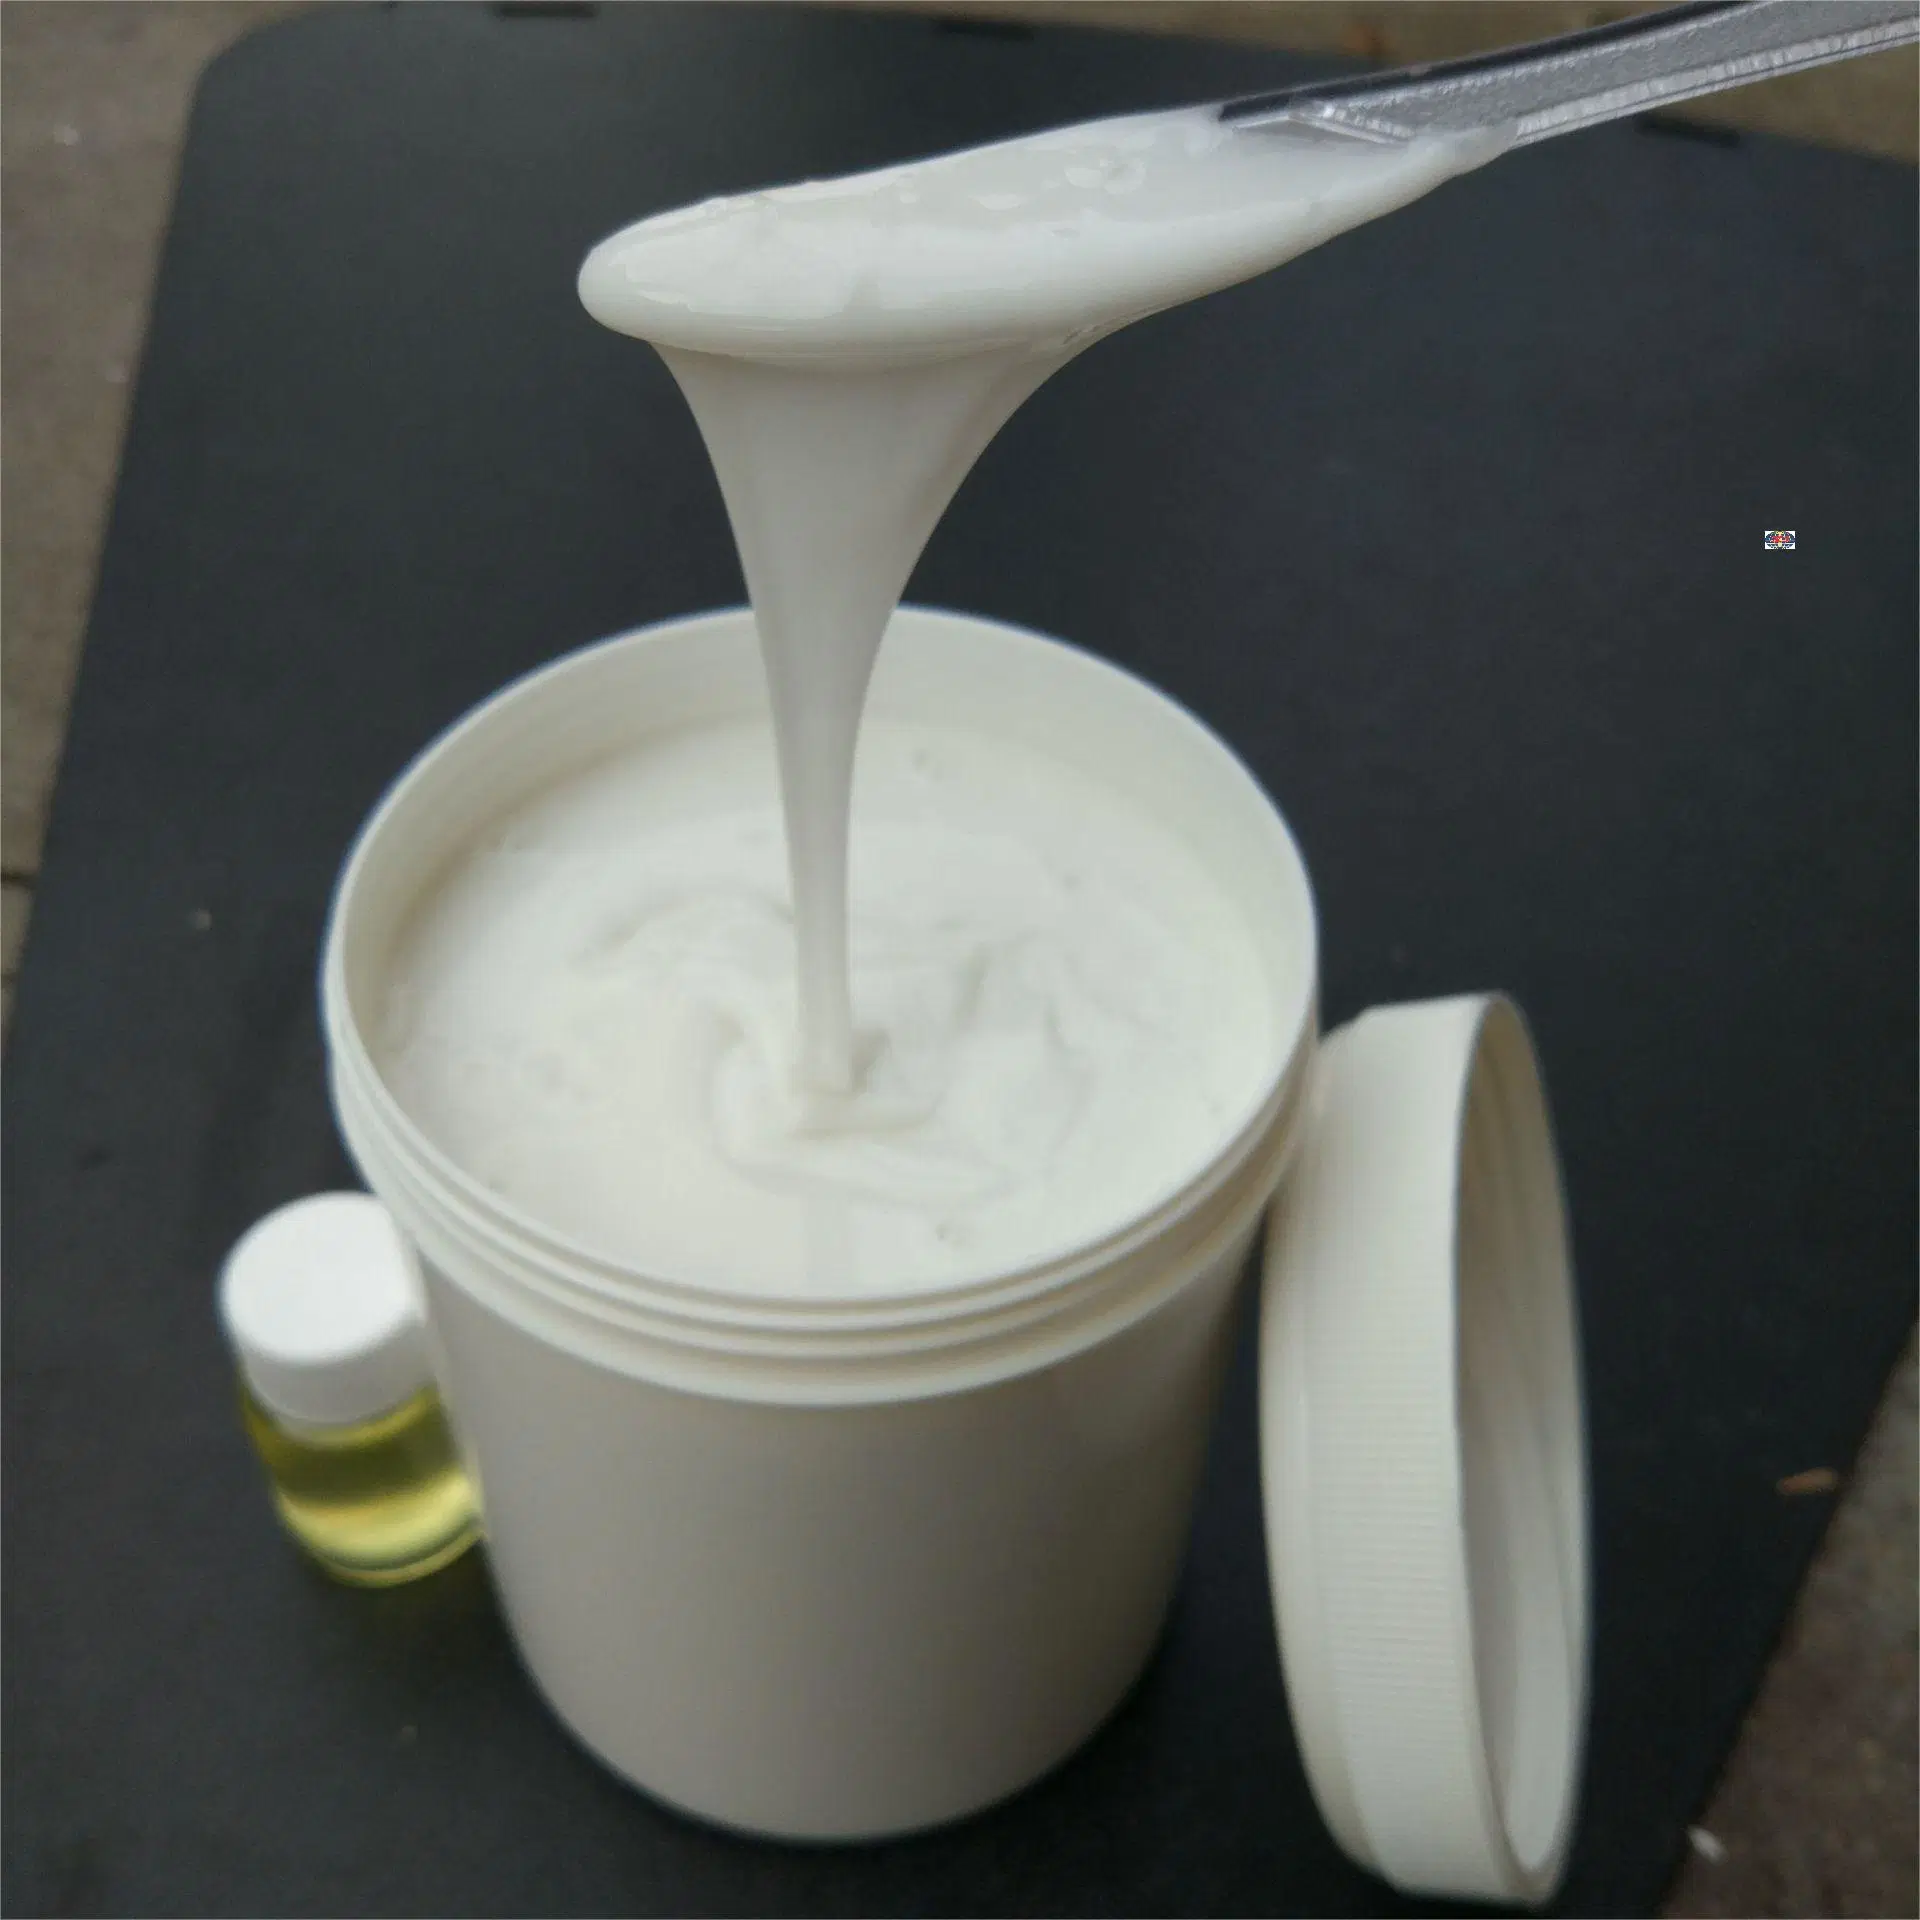 Industrial Liquid Mold Silicone Rubber Manufacturers RTV-2 Silicone Raw Material Make Turning Mold Products